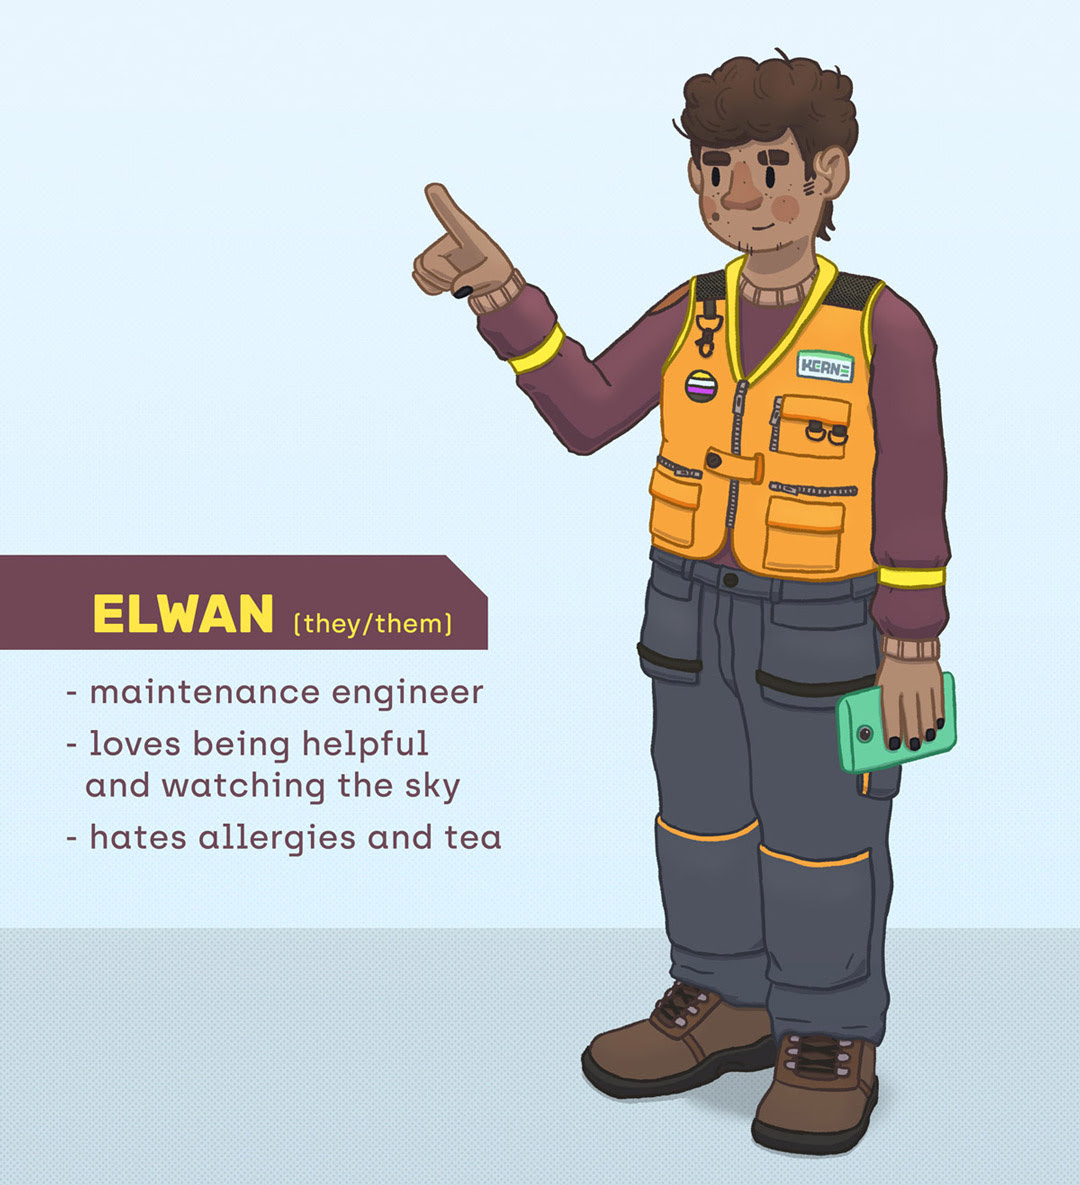 Elwan, the main character, in a high-visibility work uniform.